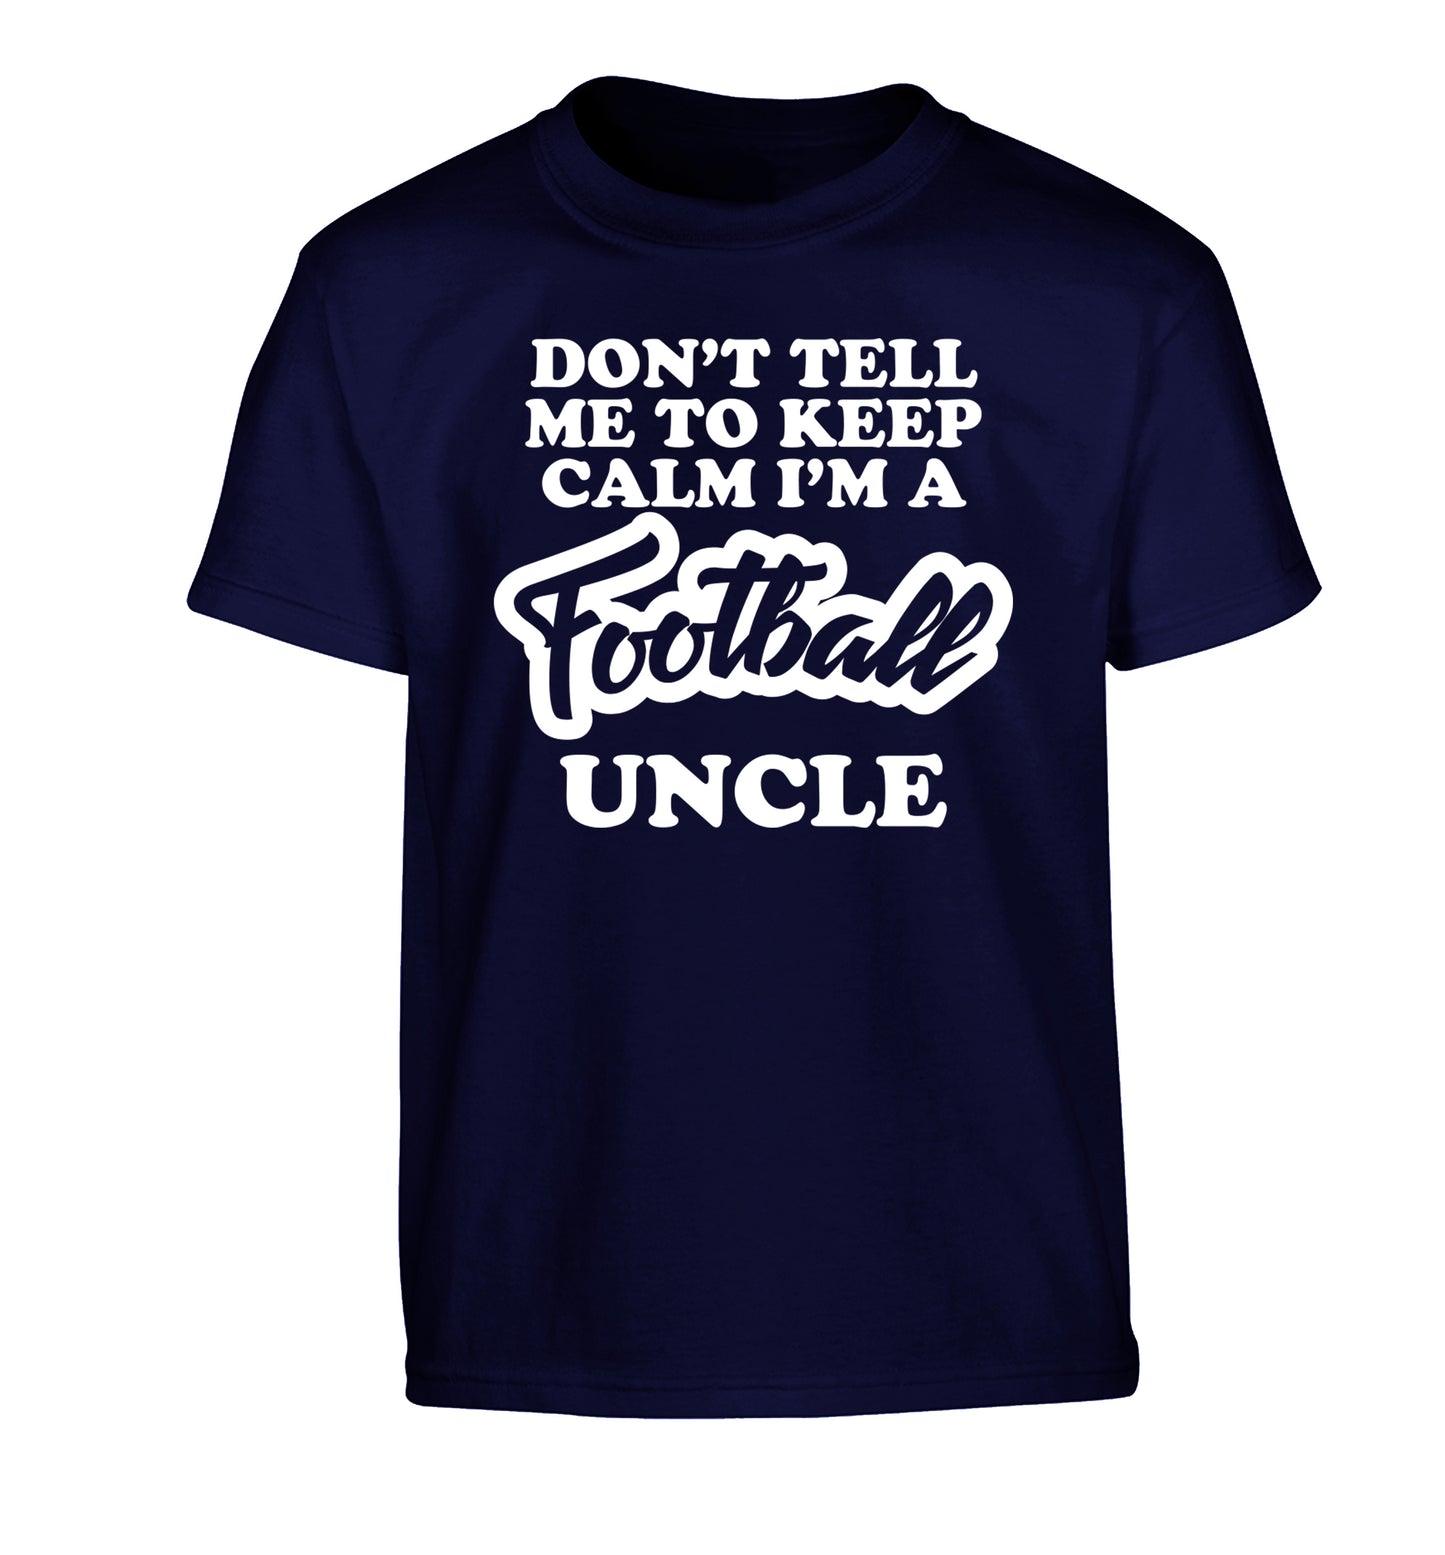 Worlds most amazing football uncle Children's navy Tshirt 12-14 Years